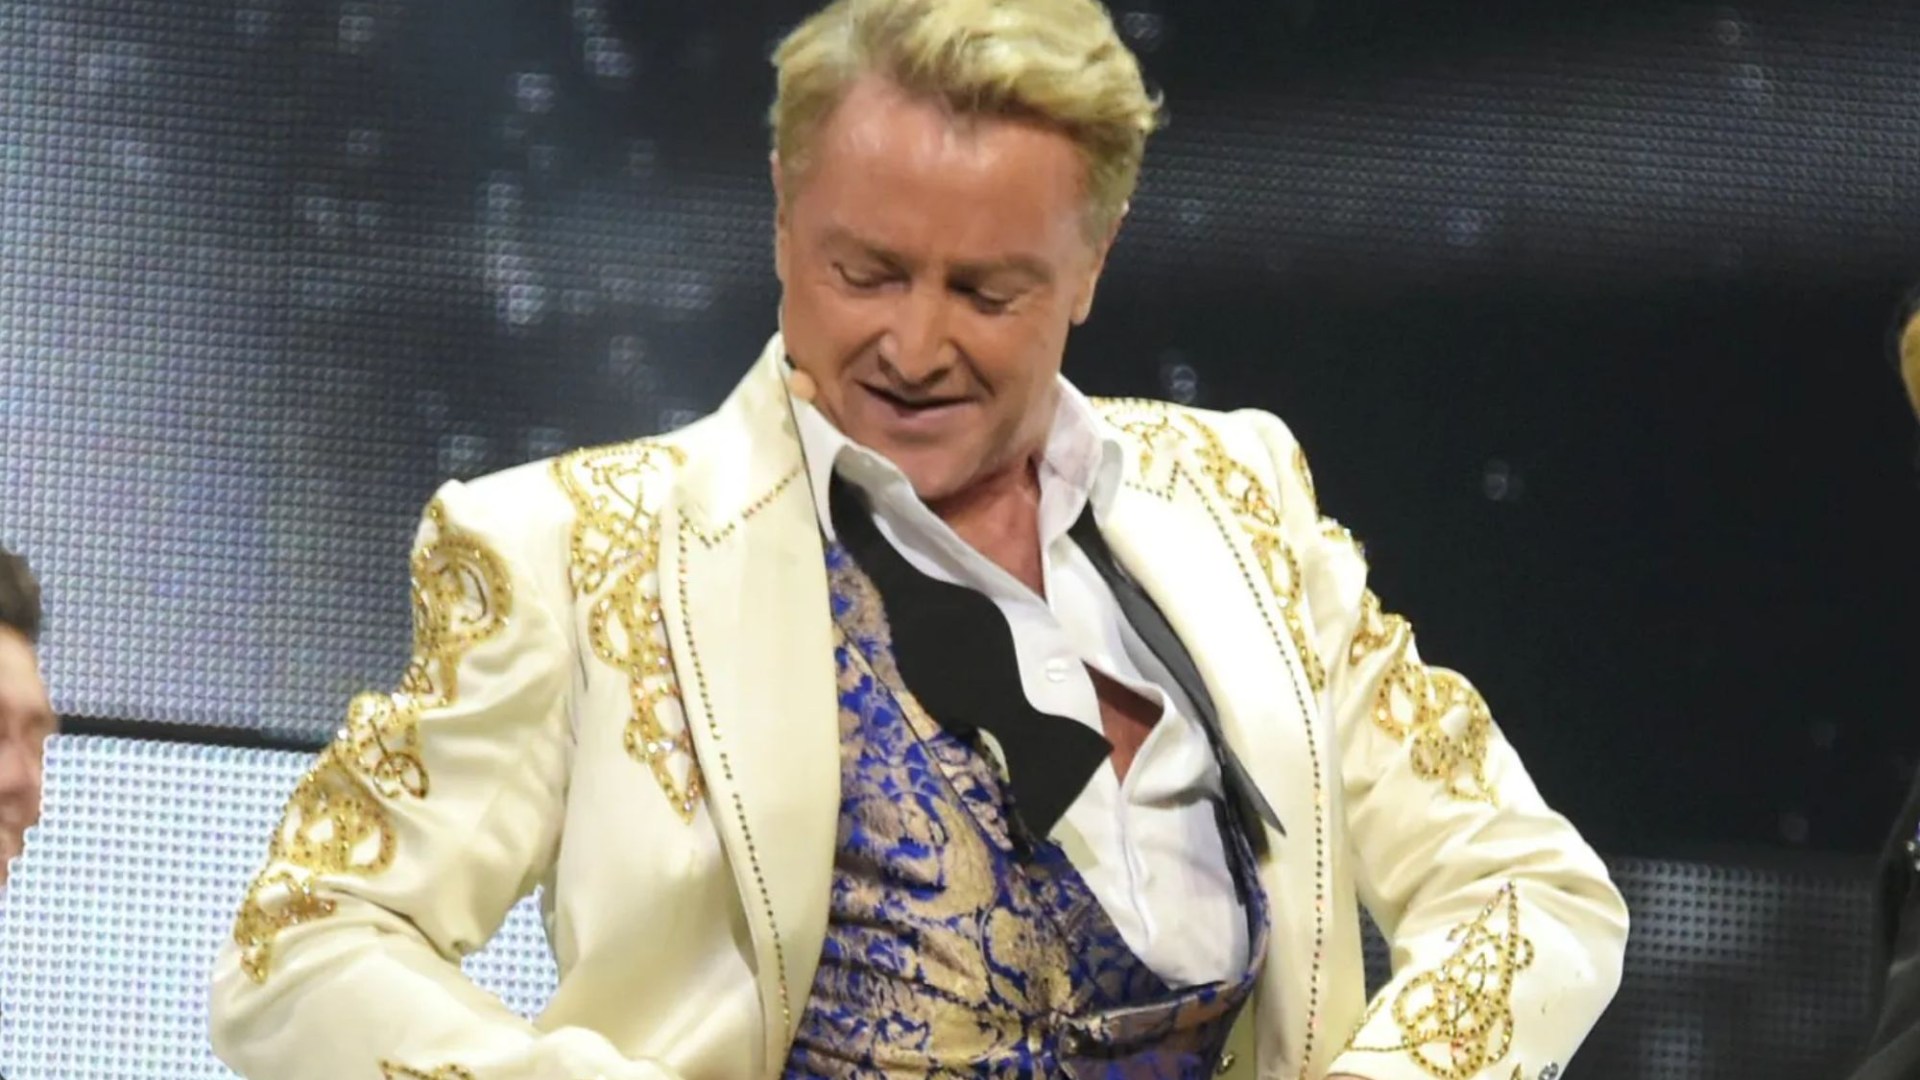 Michael Flatley vows to overtake RTE’s Toy Show flop with Christmas show as he opens up on turmoil of losing home [Video]